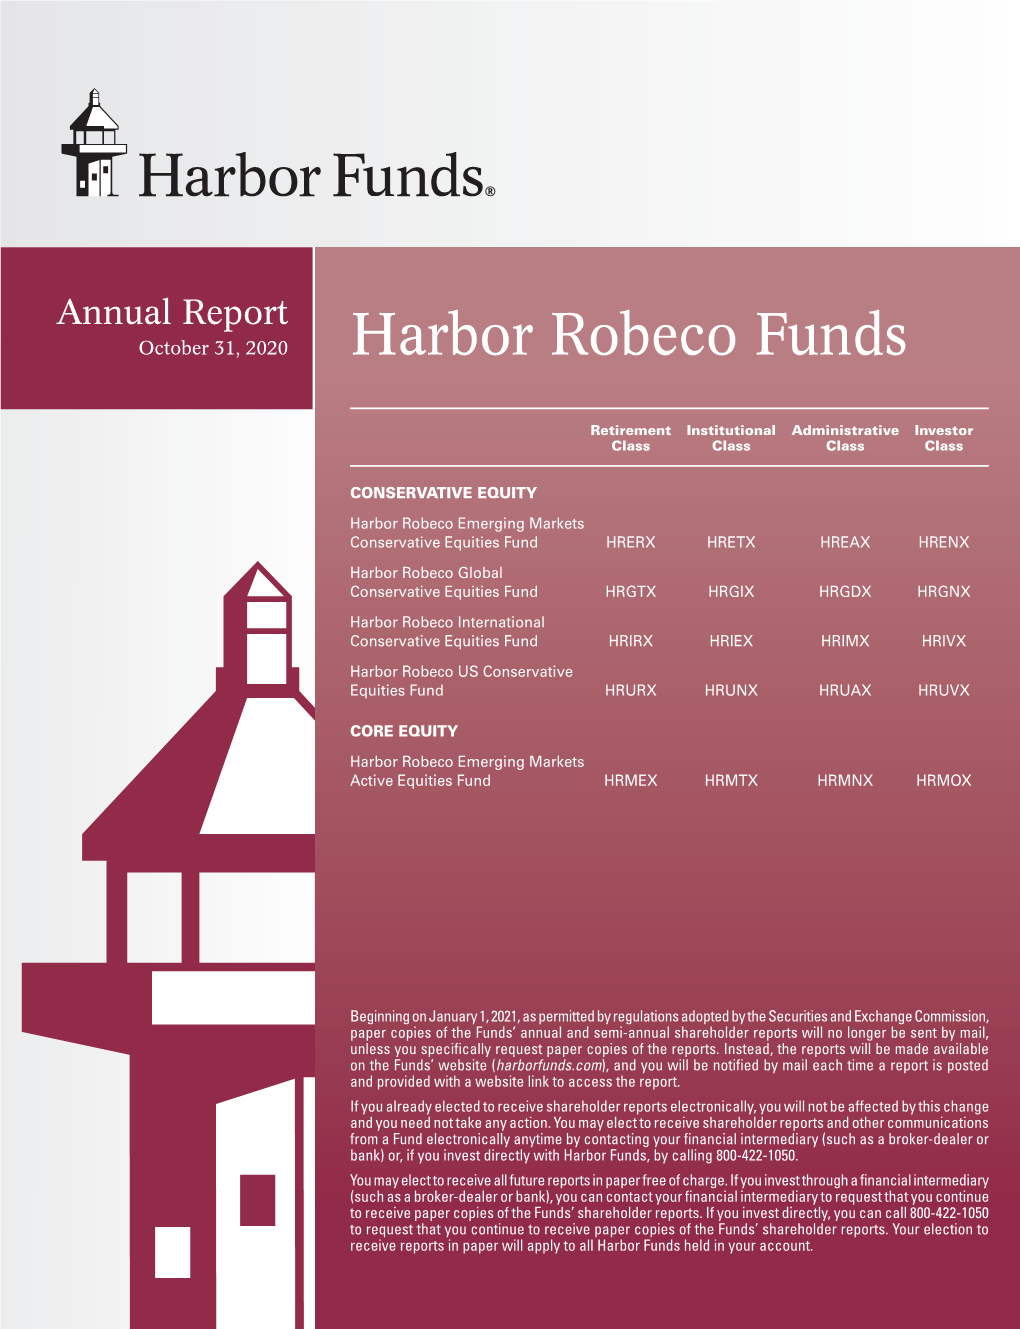 Harbor Robeco Funds Annual Report